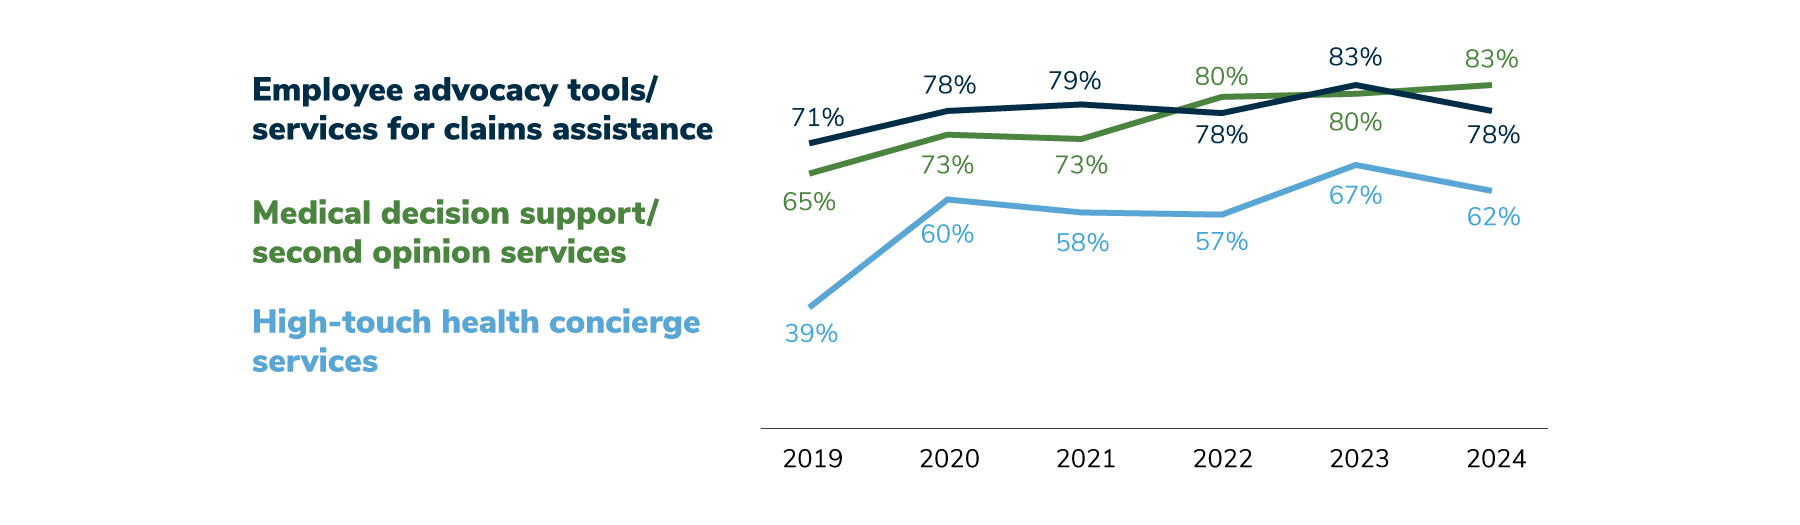 83% of employers will offer medical decision support/second-opinion services in 2024 (up from 80% in 2023). 62% of employers will provide high-touch health concierge services in 2024 (down from 67% in 2023). 78% will offer advocacy tools/services for claims assistance in 2024 (a drop from 83% in 2023).
